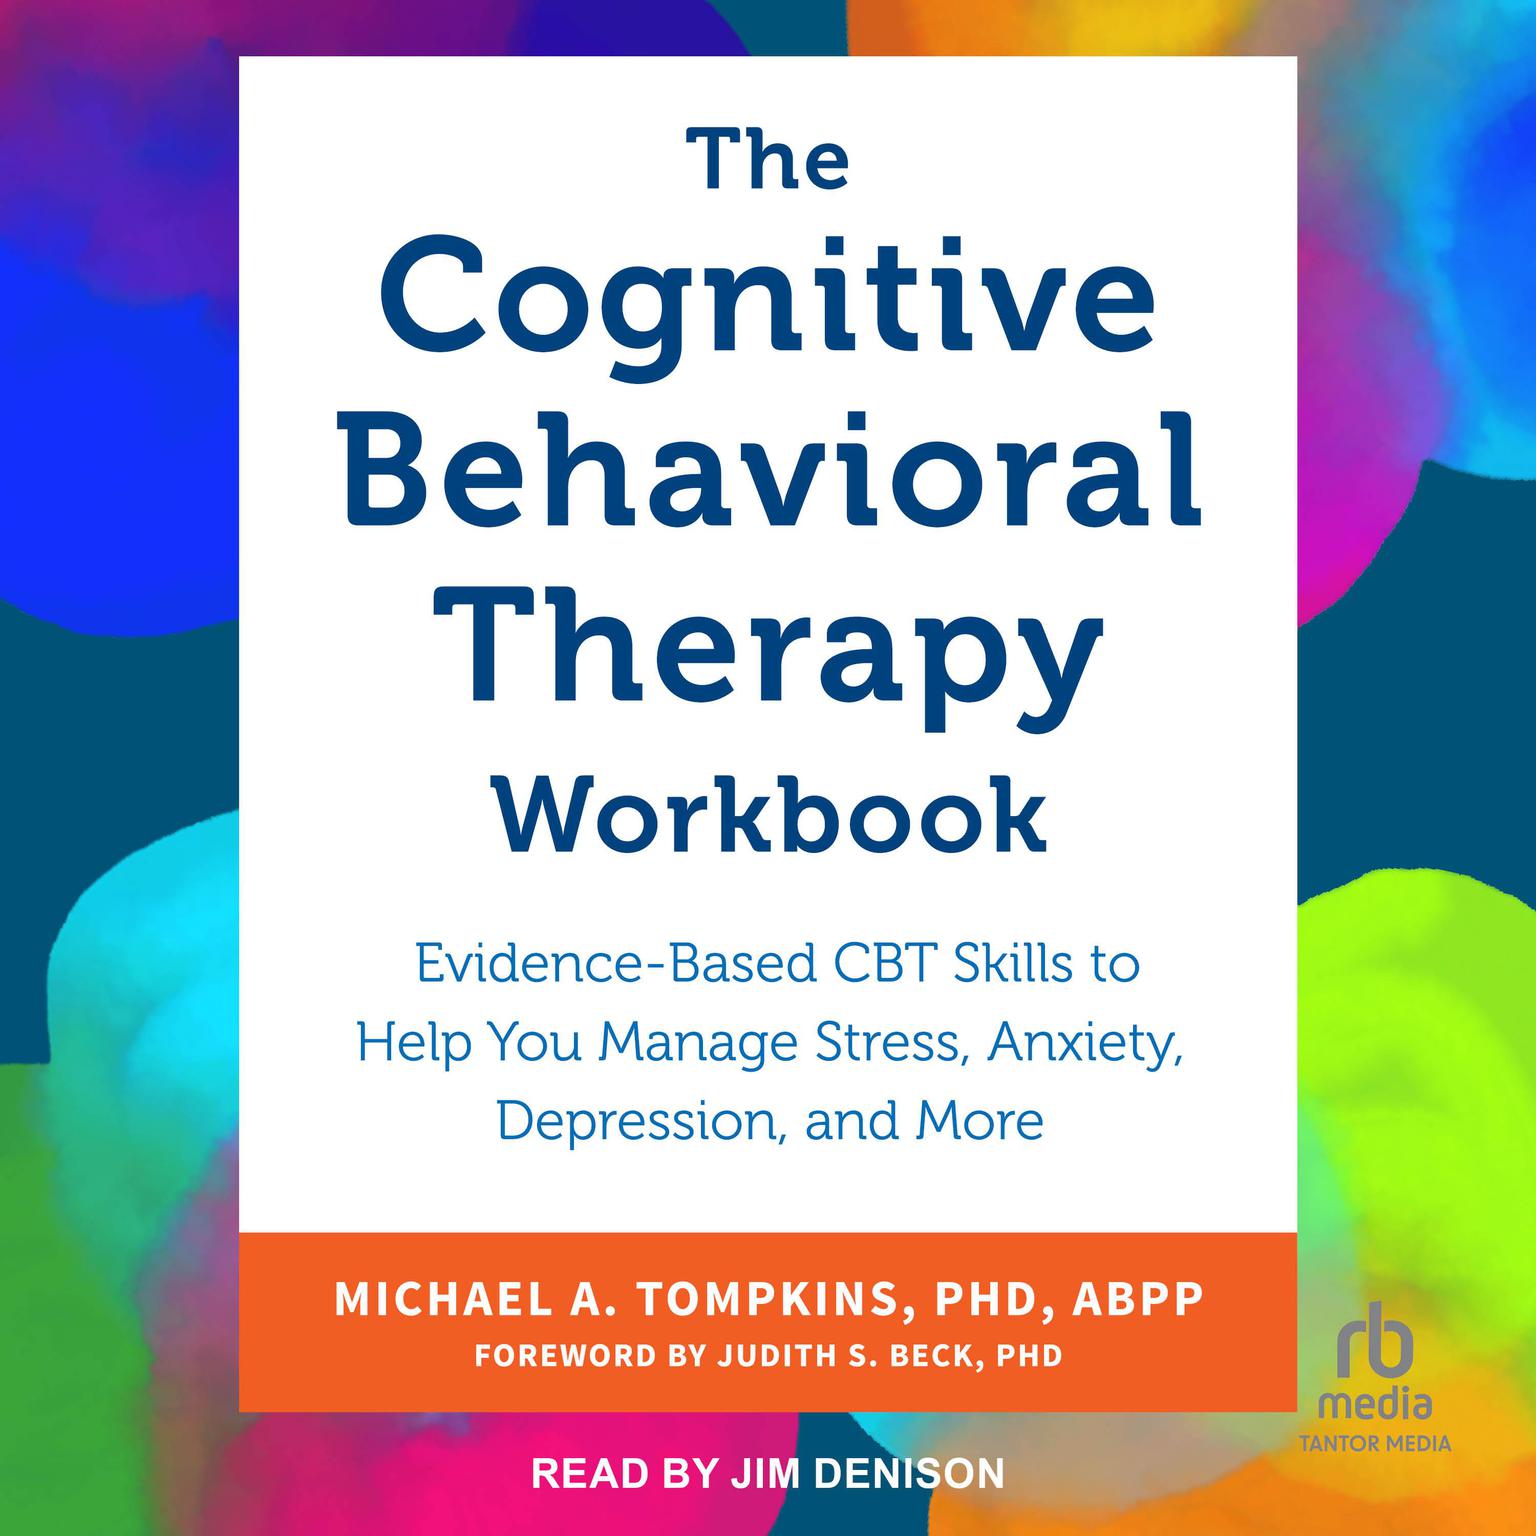 The Cognitive Behavioral Therapy Workbook: Evidence-Based CBT Skills to Help You Manage Stress, Anxiety, Depression, and More Audiobook, by Michael A. Tompkins, PhD, ABPP